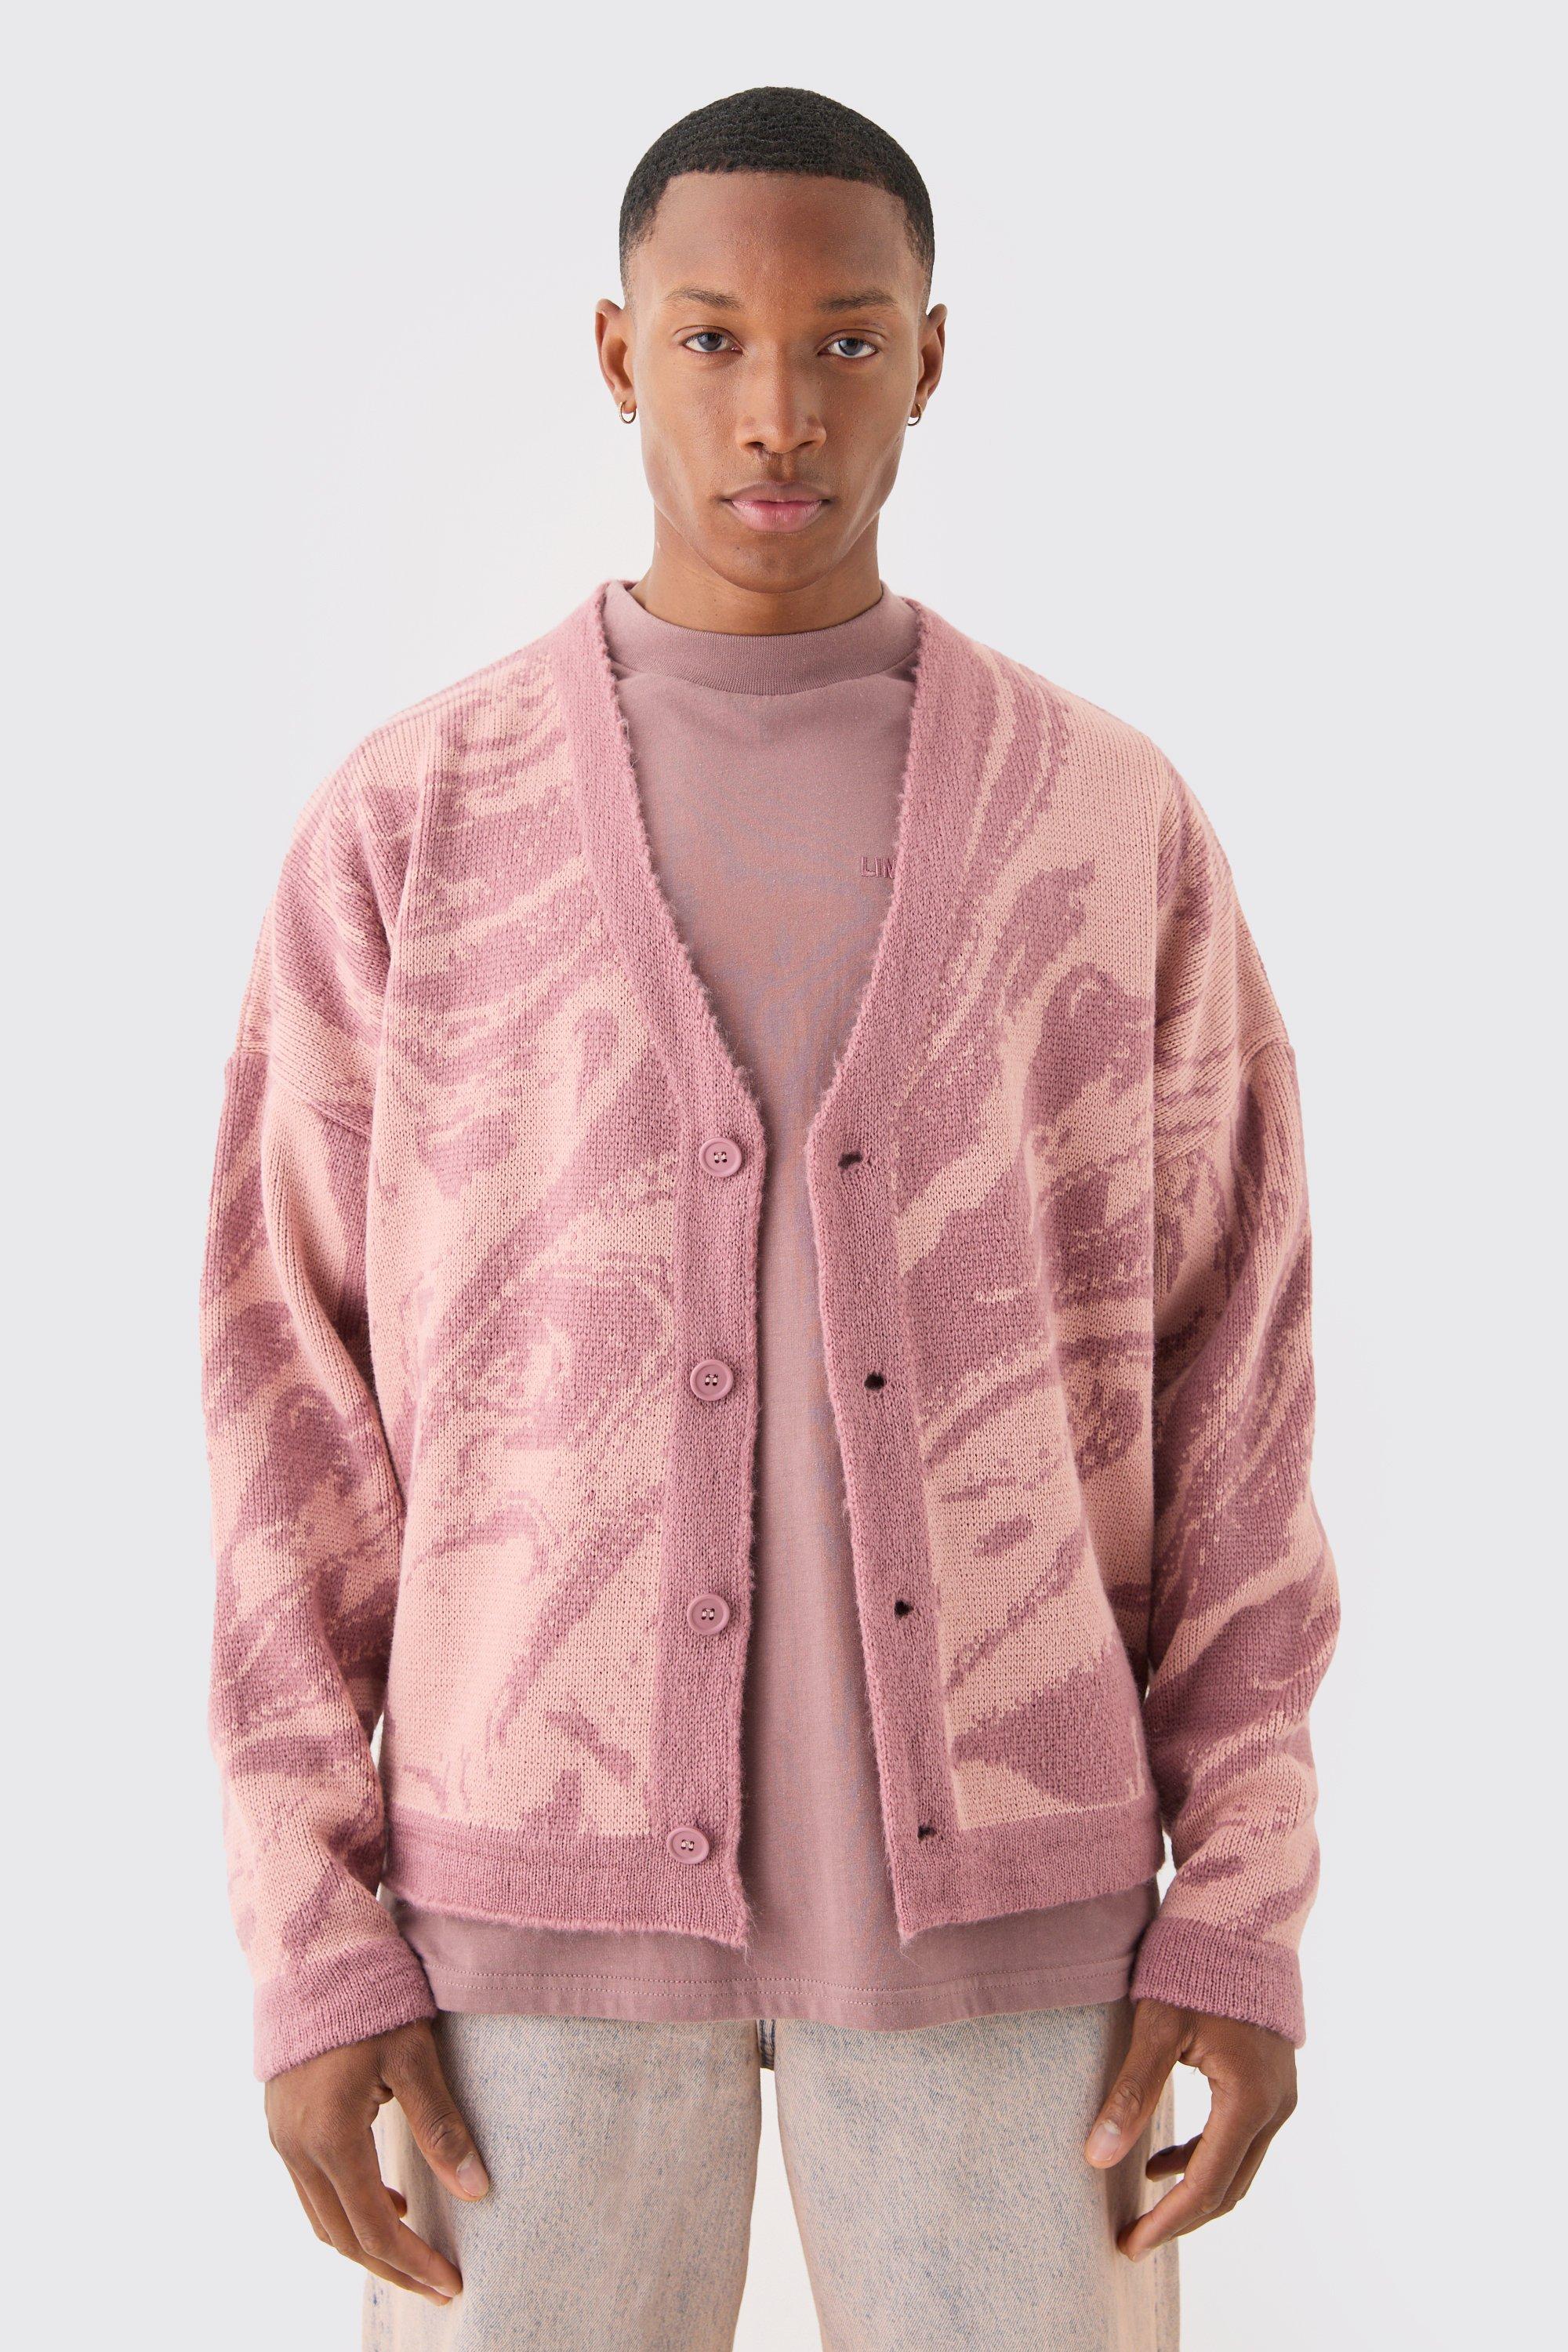 Boohoo Boxy Oversized Brushed Abstract All Over Jacquard Cardigan, Dusty Pink